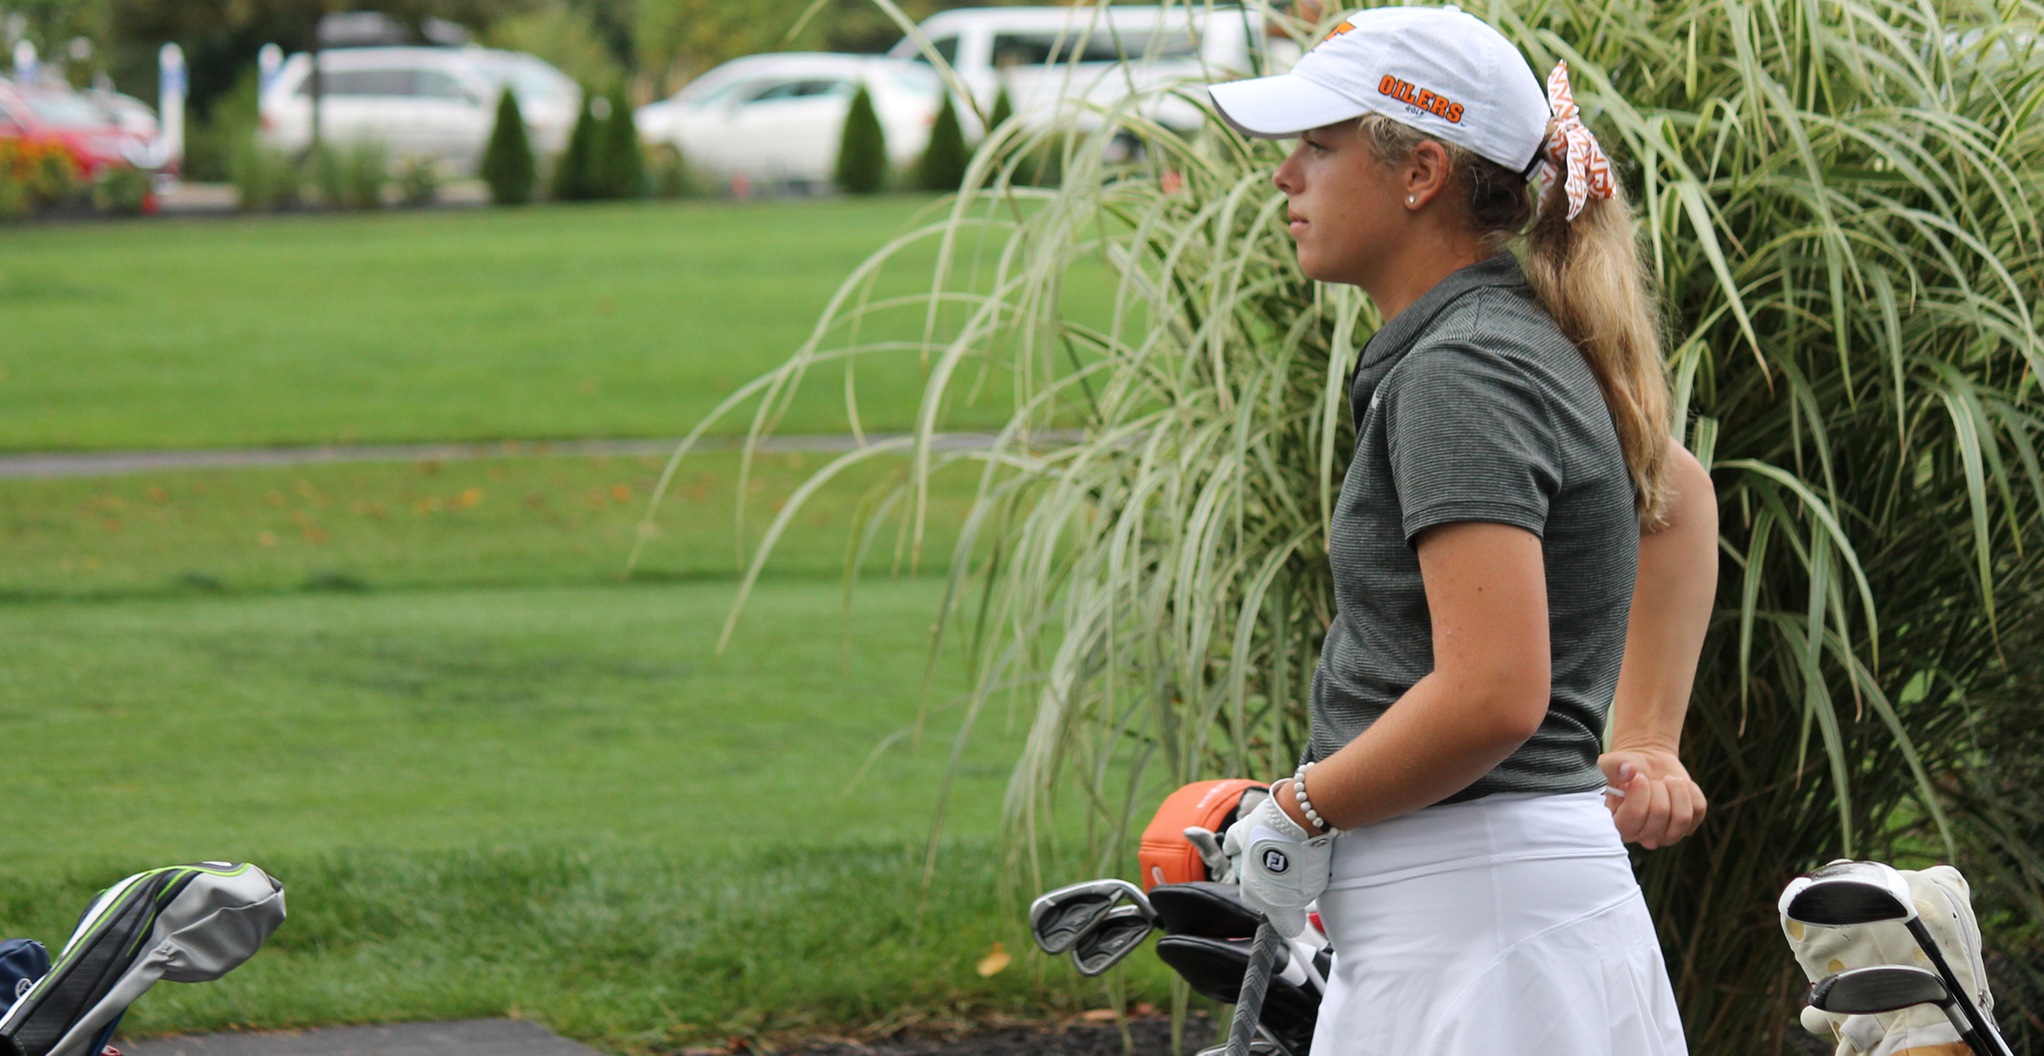 Oilers Take 11th at Peggy Kirk Bell Invite